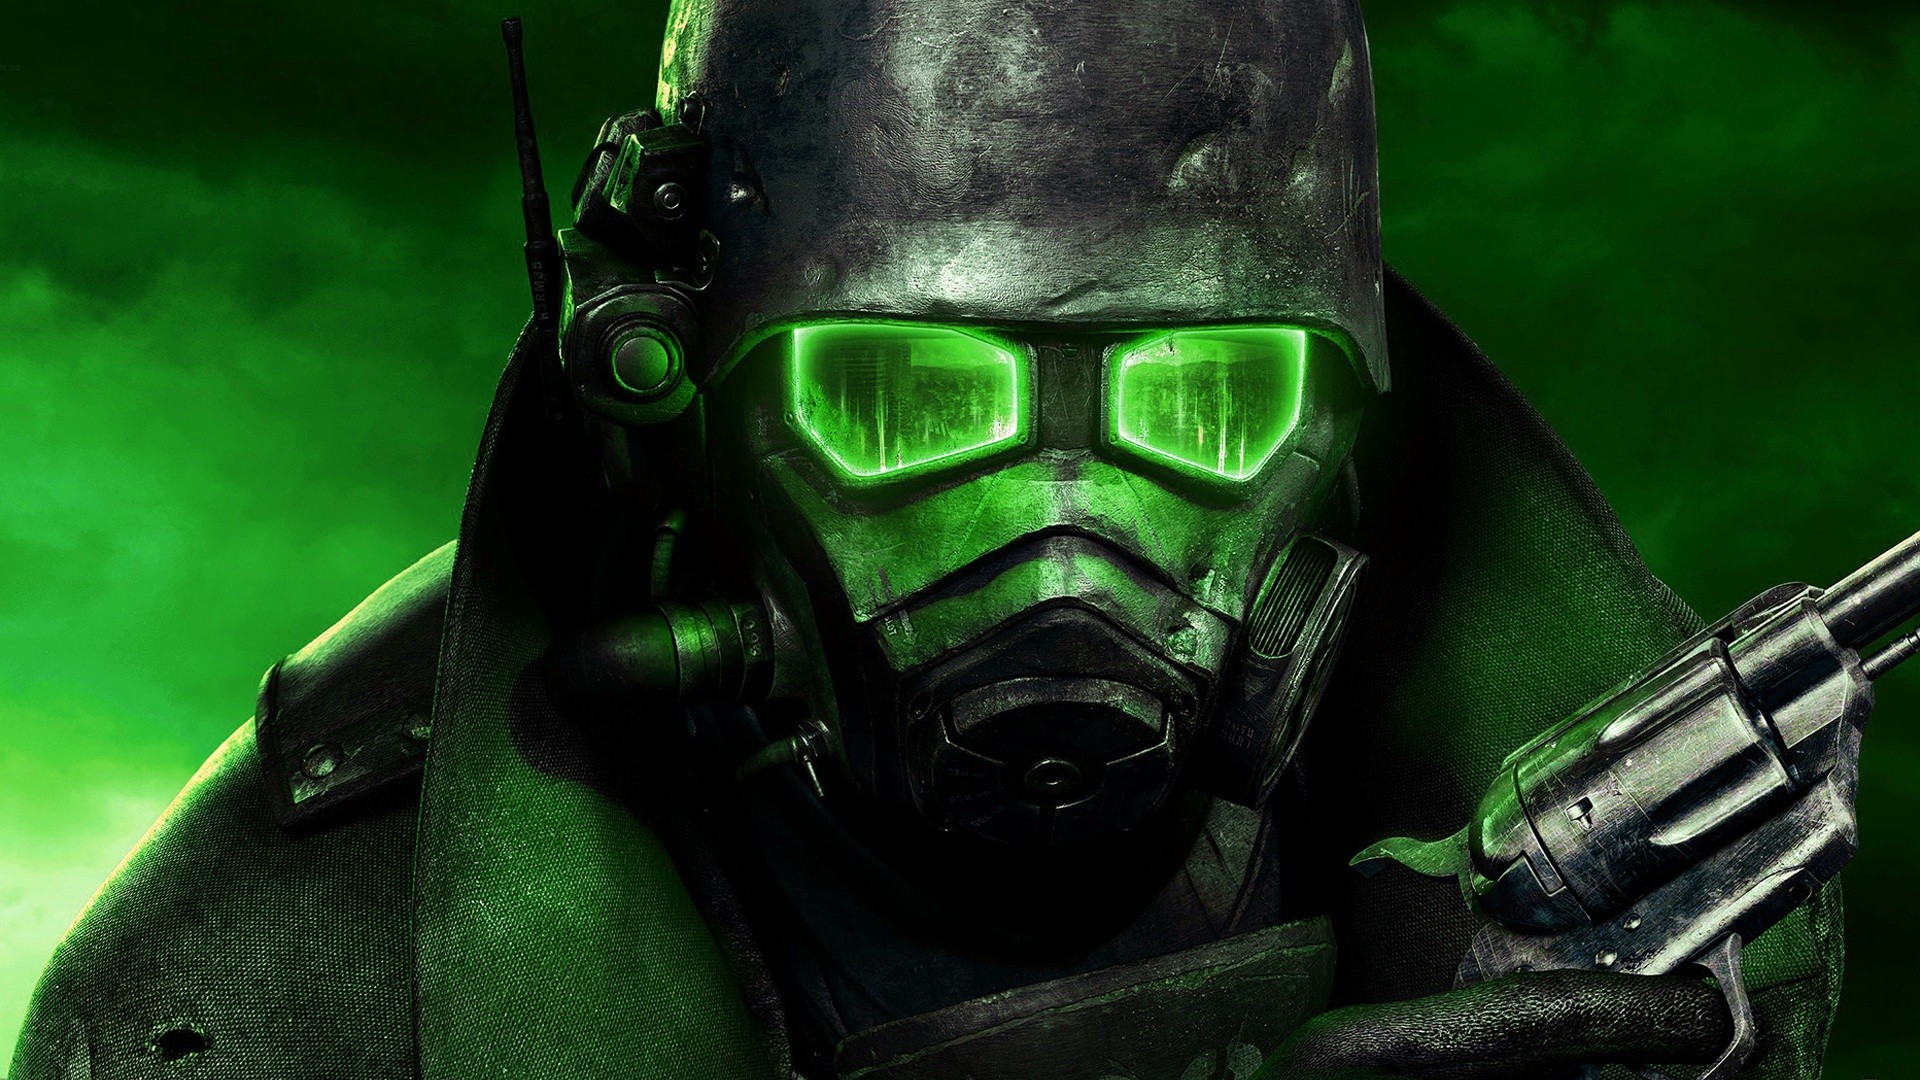 General 1920x1080 Fallout video games weapon PC gaming apocalyptic video game art gun green background